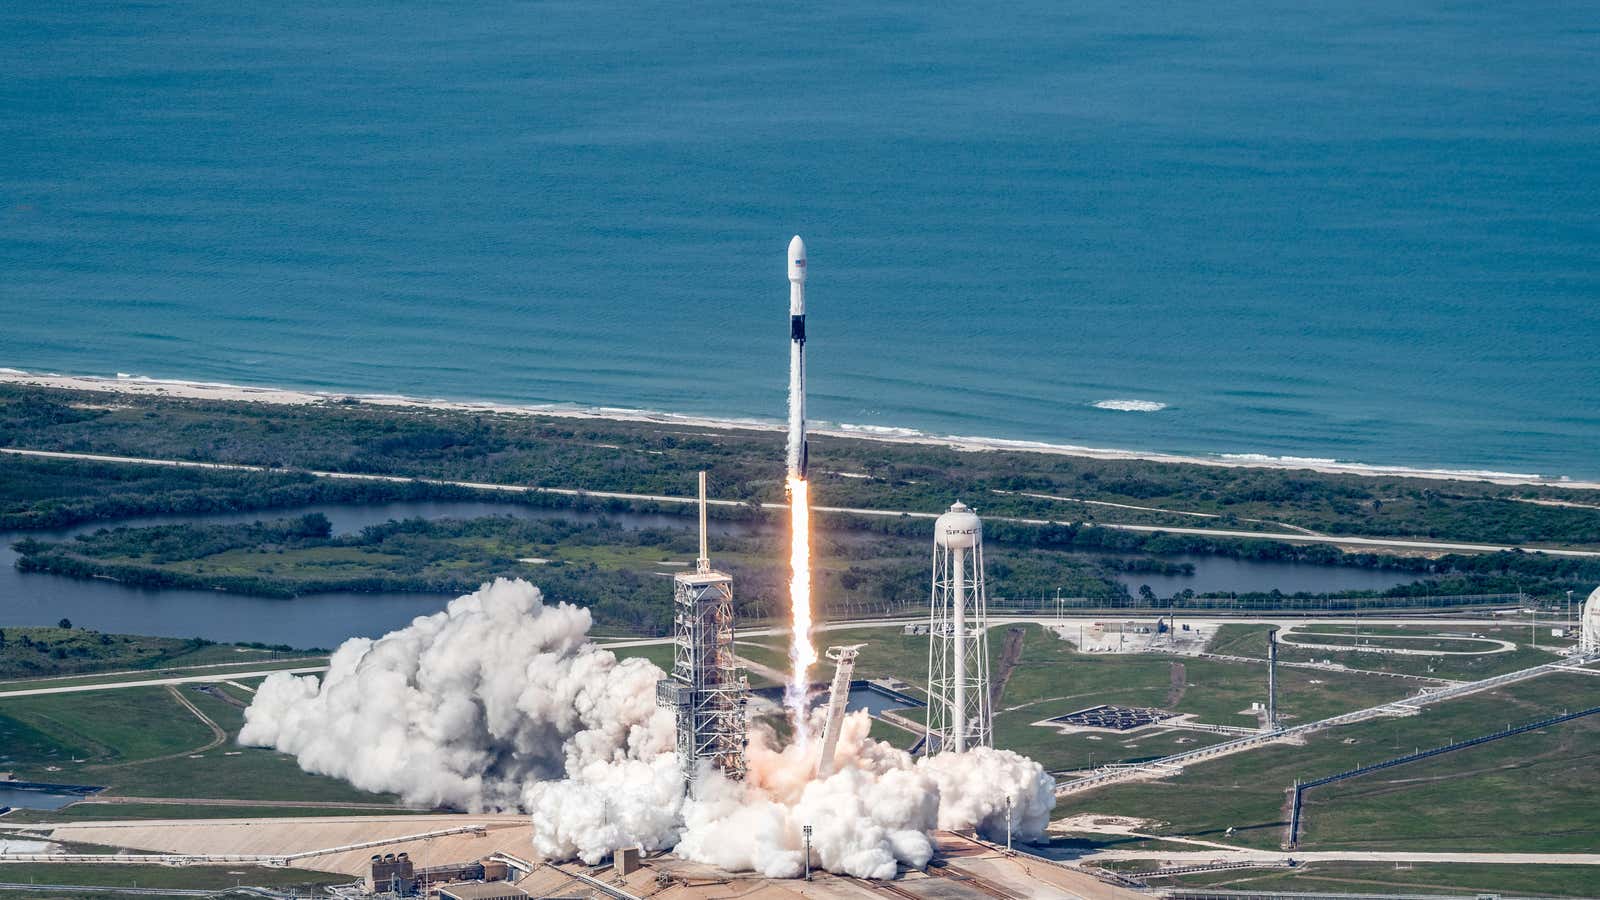 In May 2018, this Falcon 9 rocket went to orbit. Today, it goes back for a second time.